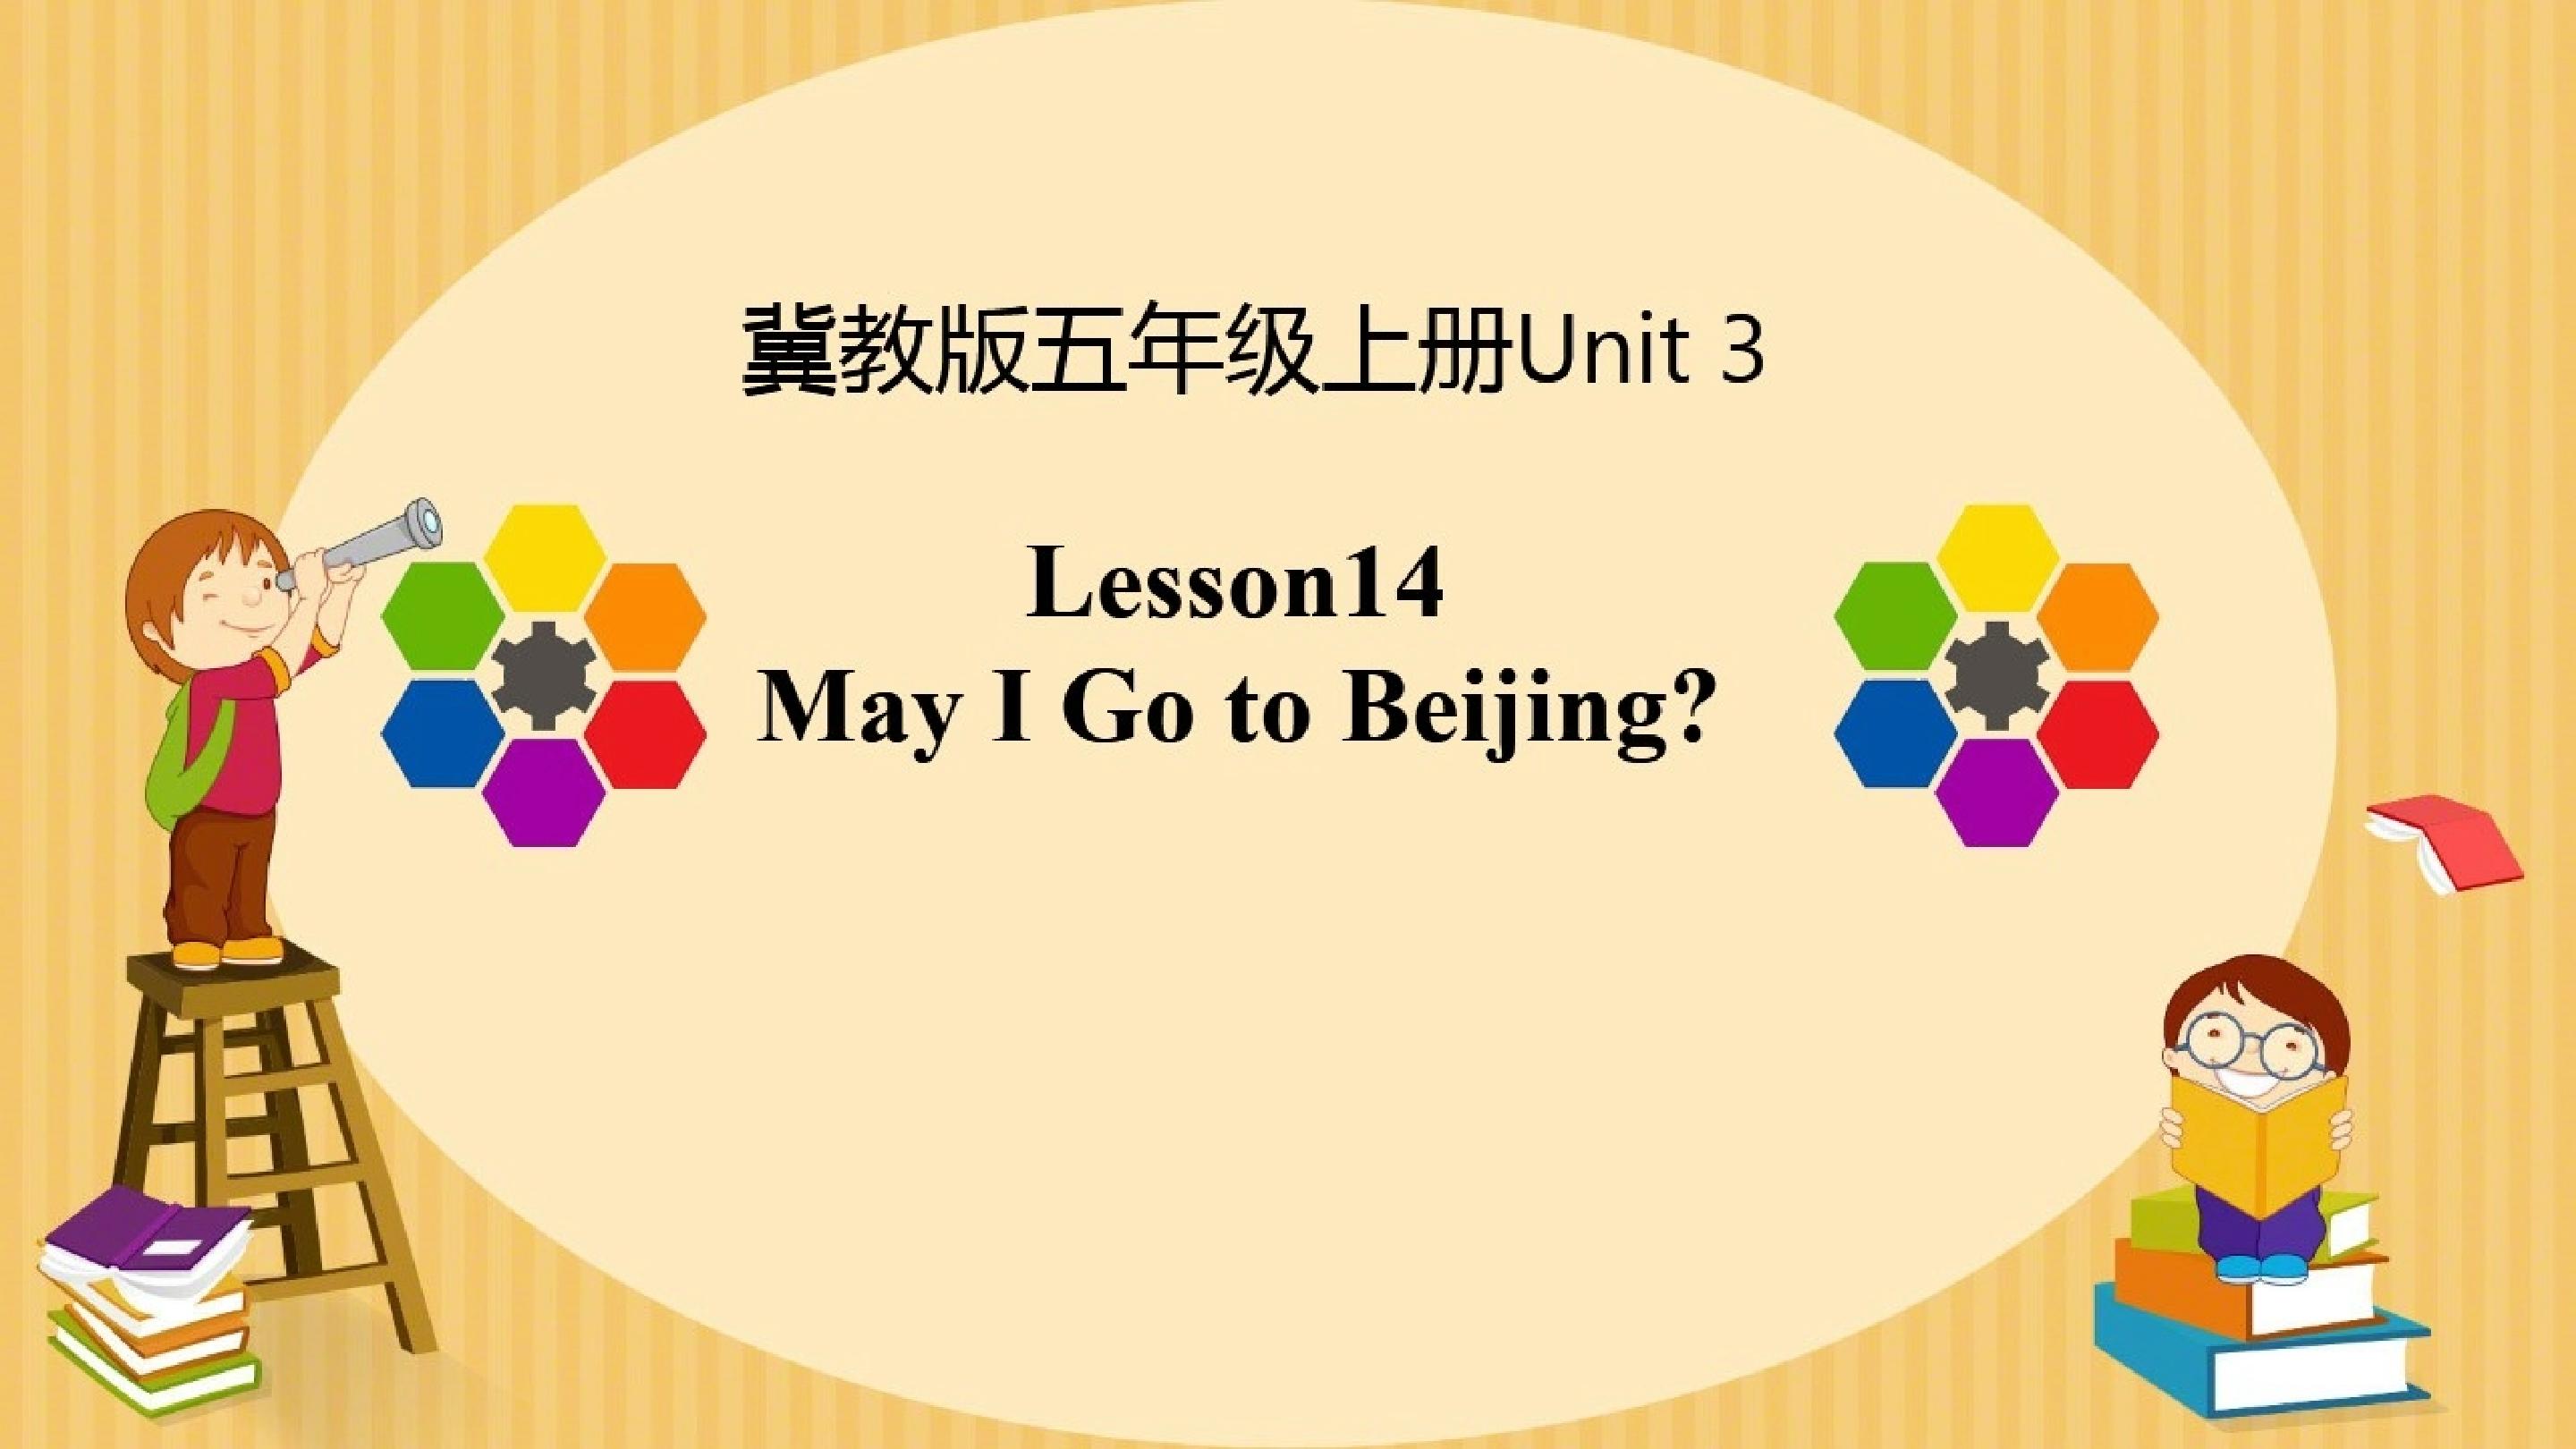 May I Go to Beijing?